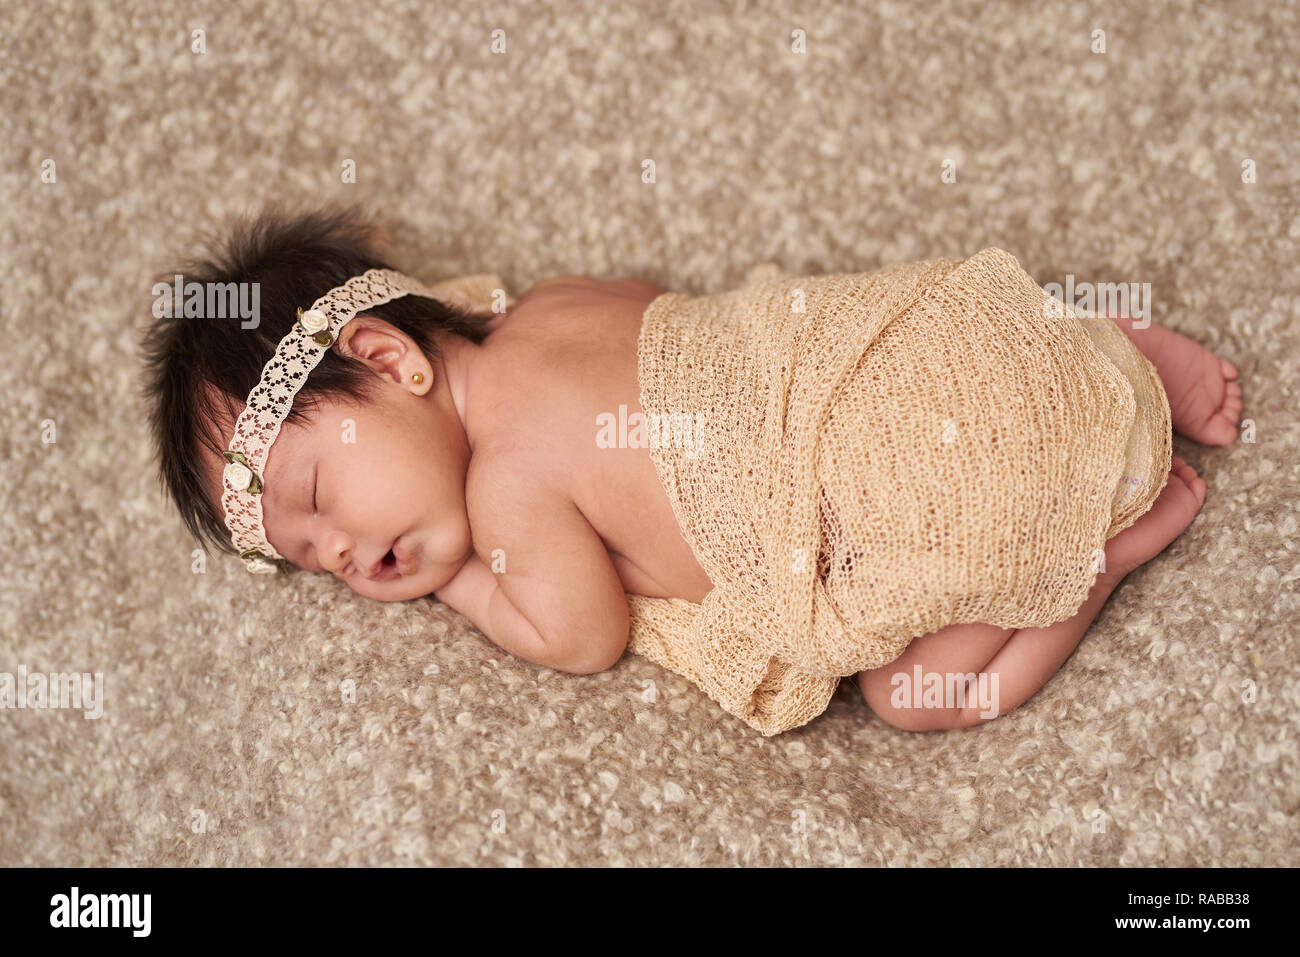 Above view of small sleeping newborn baby on brown soft blanket Stock Photo